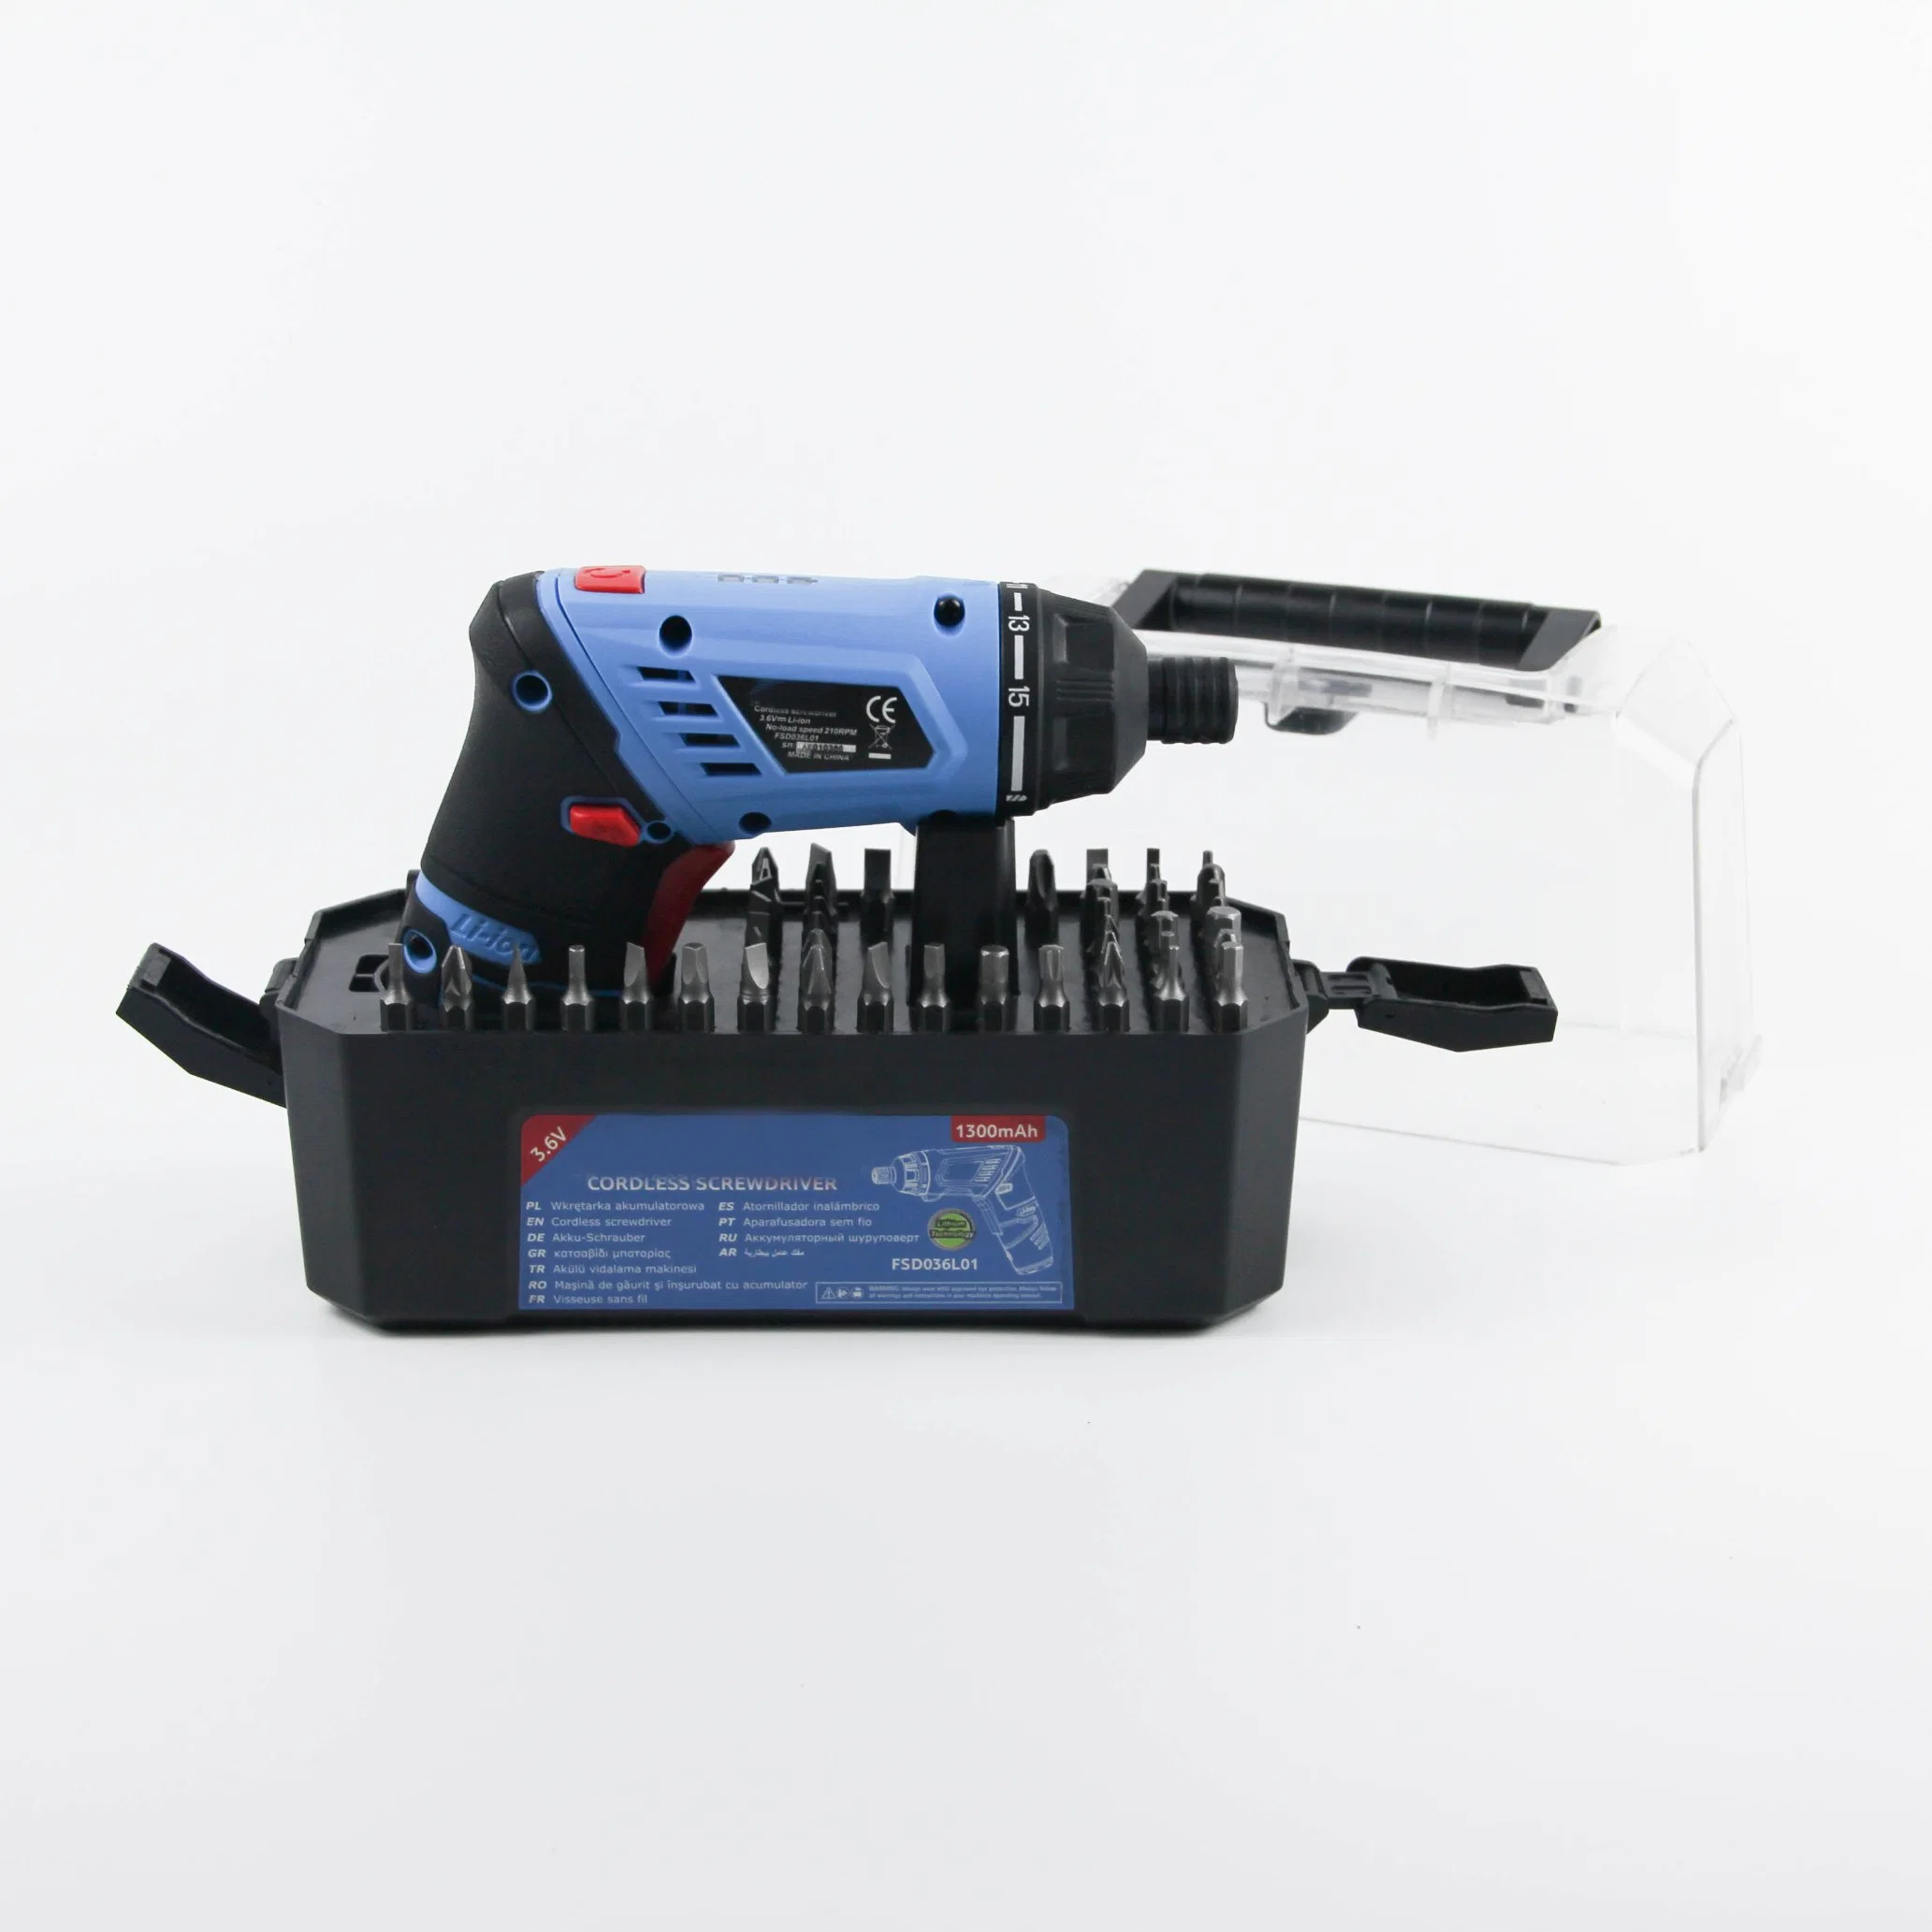 Customized Multifunctional Hardware Tools Electric Screwdriver with Wholesale/Supplier Price